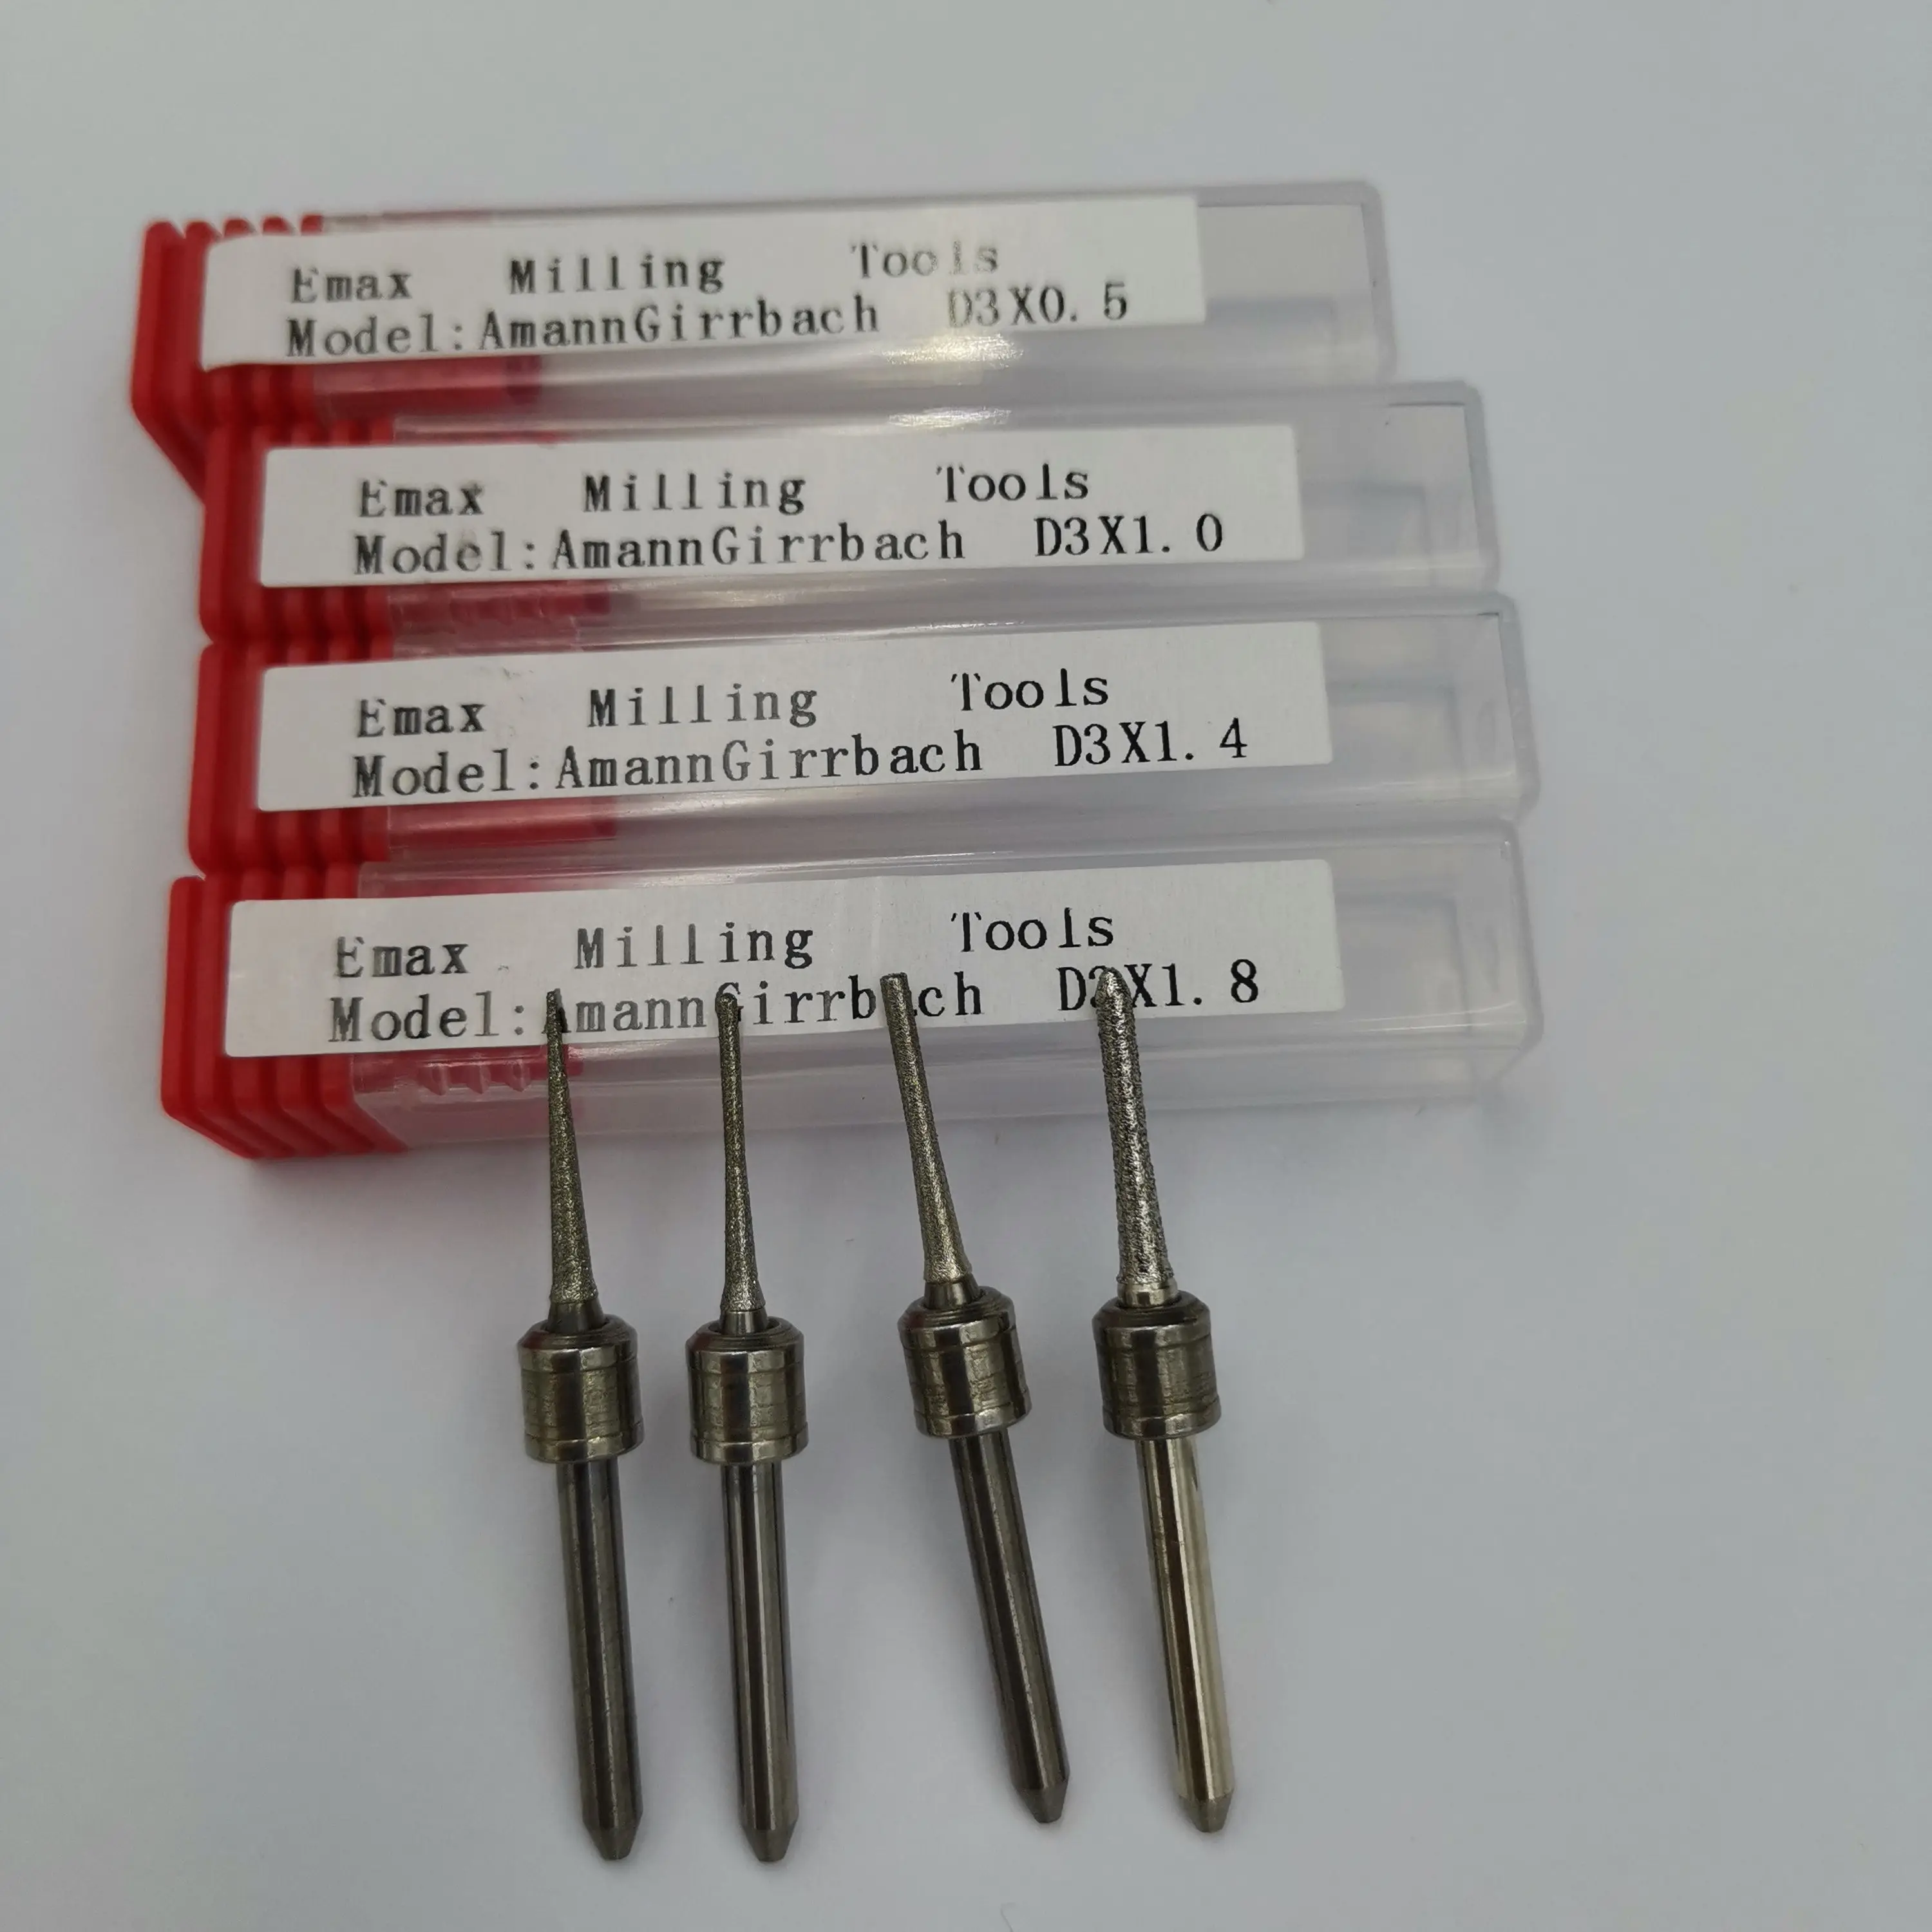 AMANN GIRRBACH  Ceramill Roto Motion 2 Germany Diamond DC Coating Milling Burs for Zirconia 0.3/0.4/0.6/1.0/2.5mm images - 6